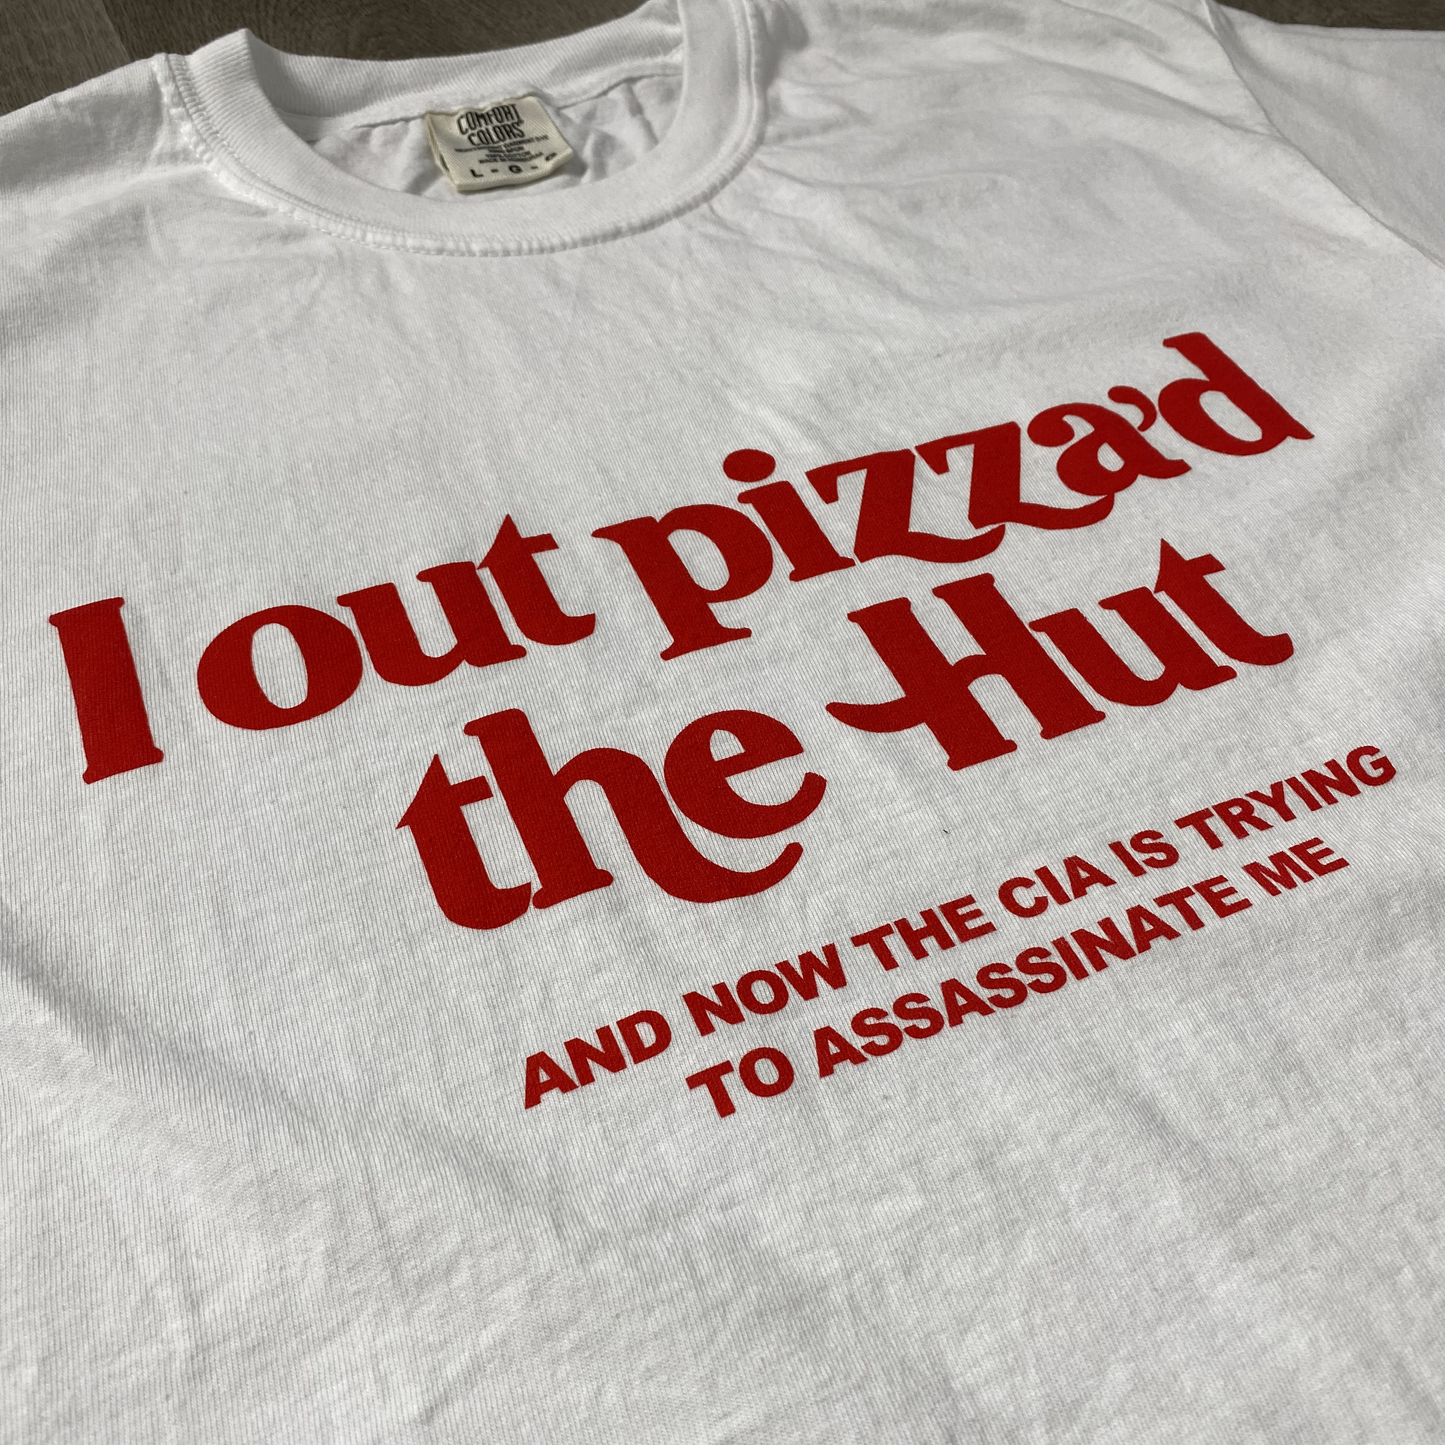 I OUTPIZZAD THE HUT AND NOW THE CIA IS TRYING TO ASSASSINATE ME SHIRT